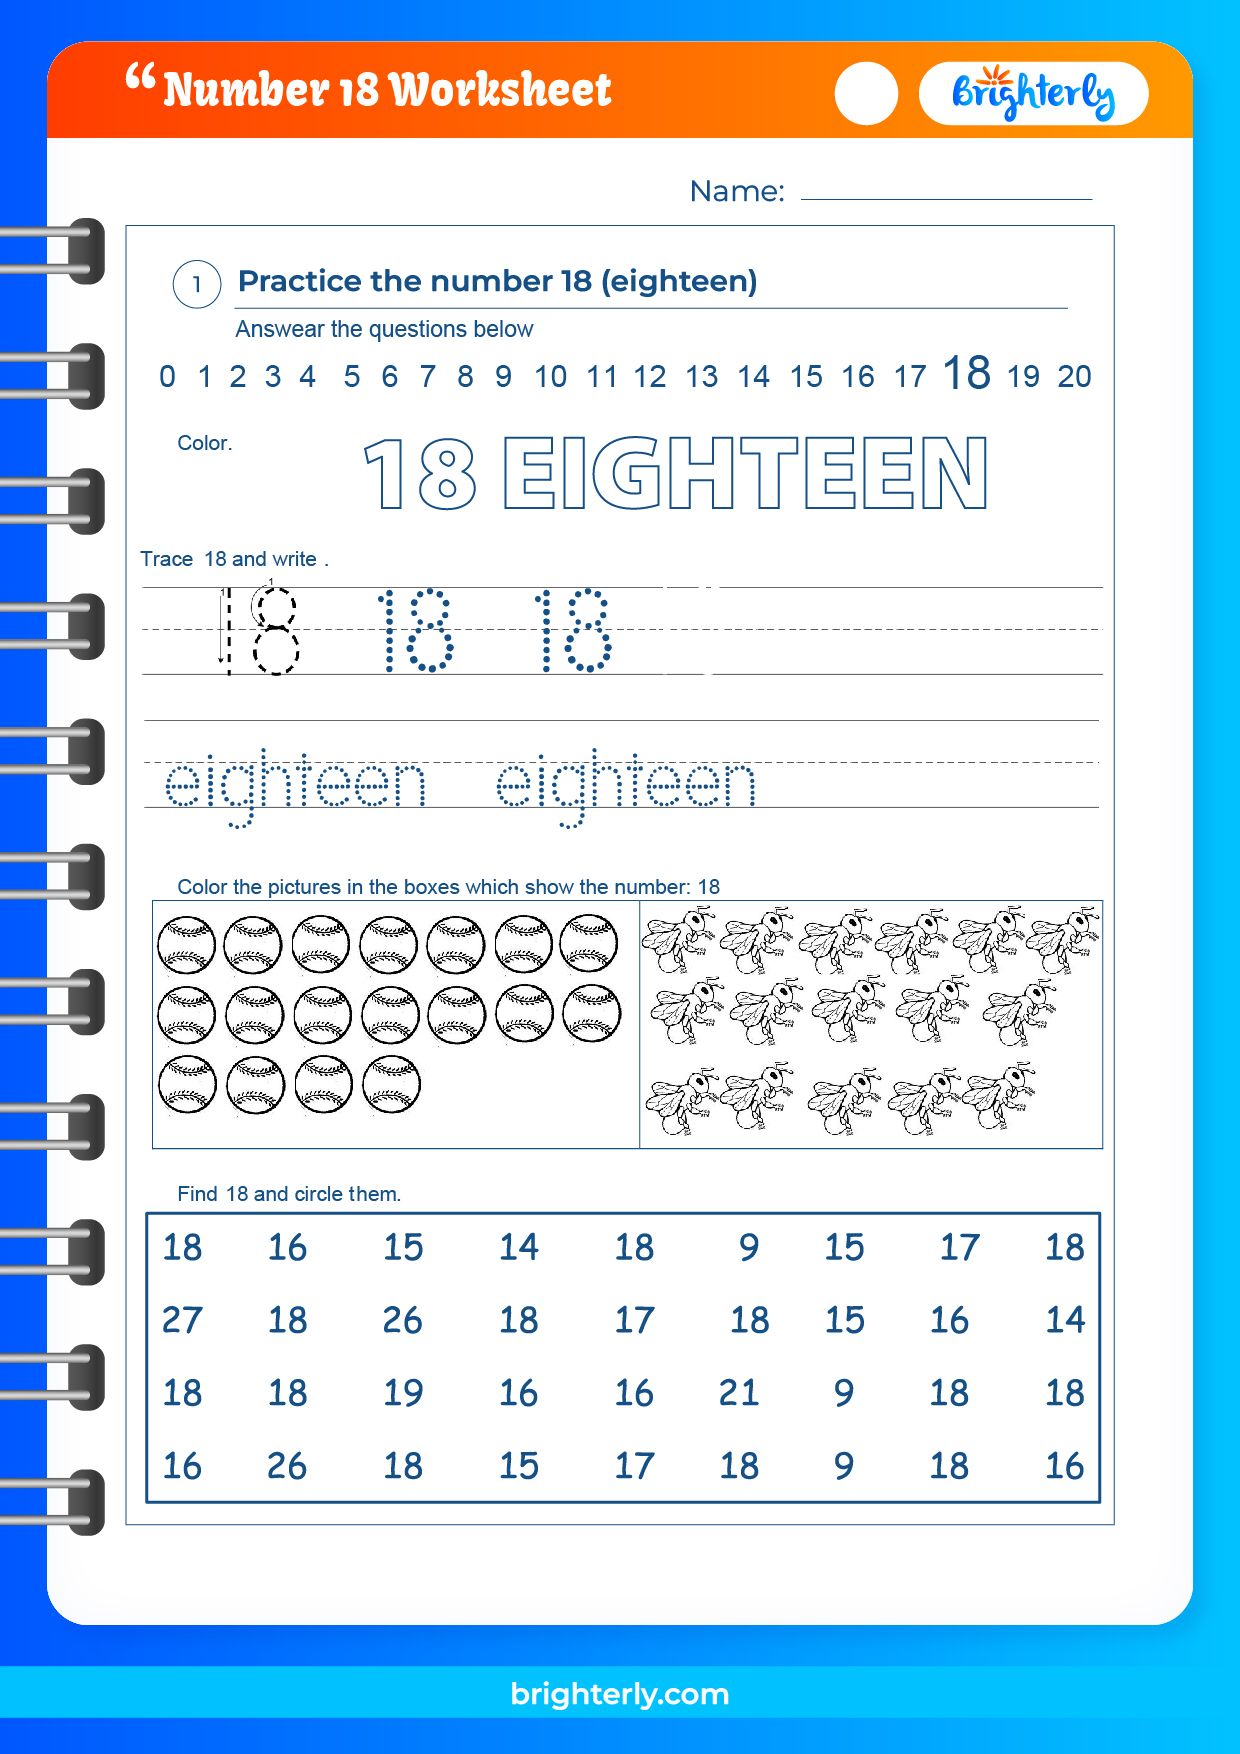 free-printable-number-18-eighteen-worksheets-for-kids-pdfs